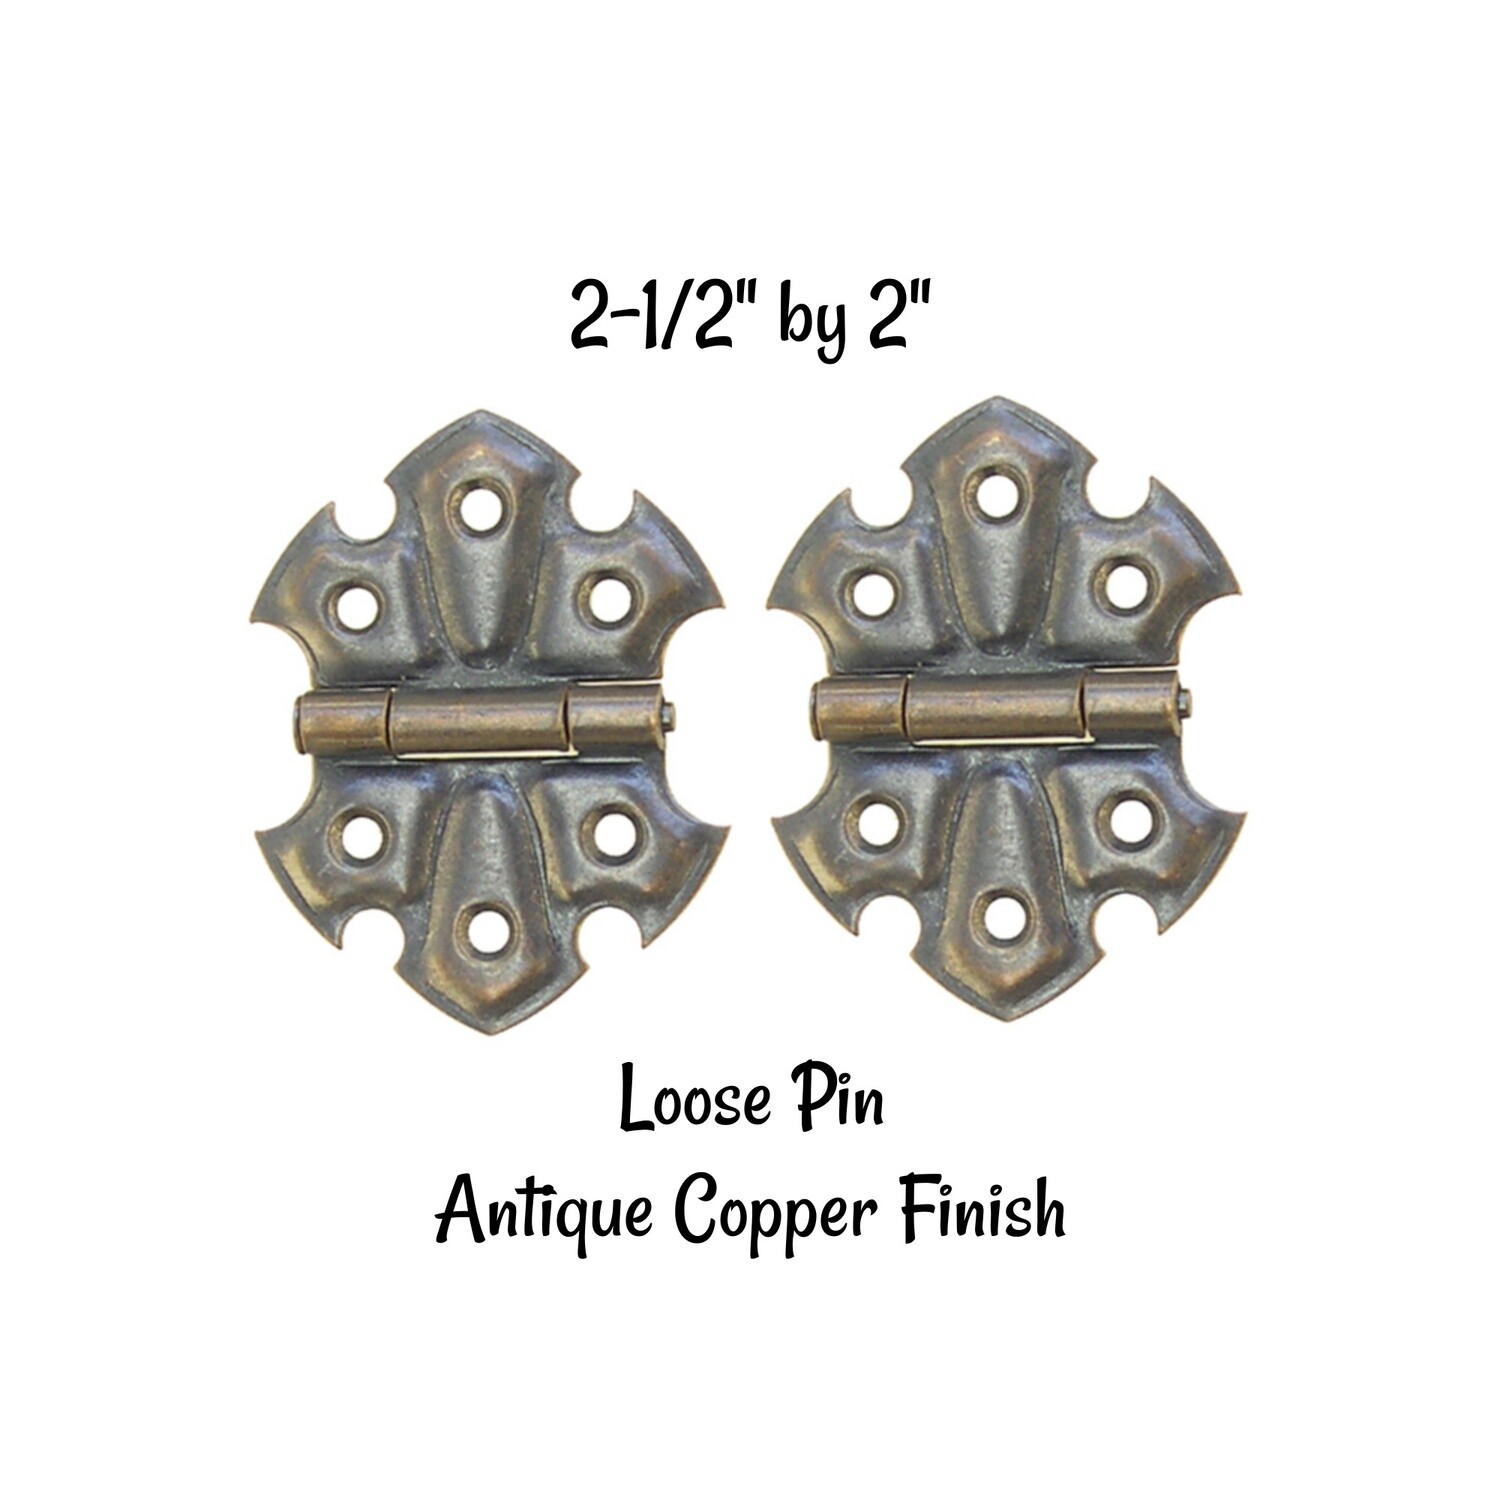 Pair of Loose Pin Cabinet Hinges - Antique Copper Plated Steel